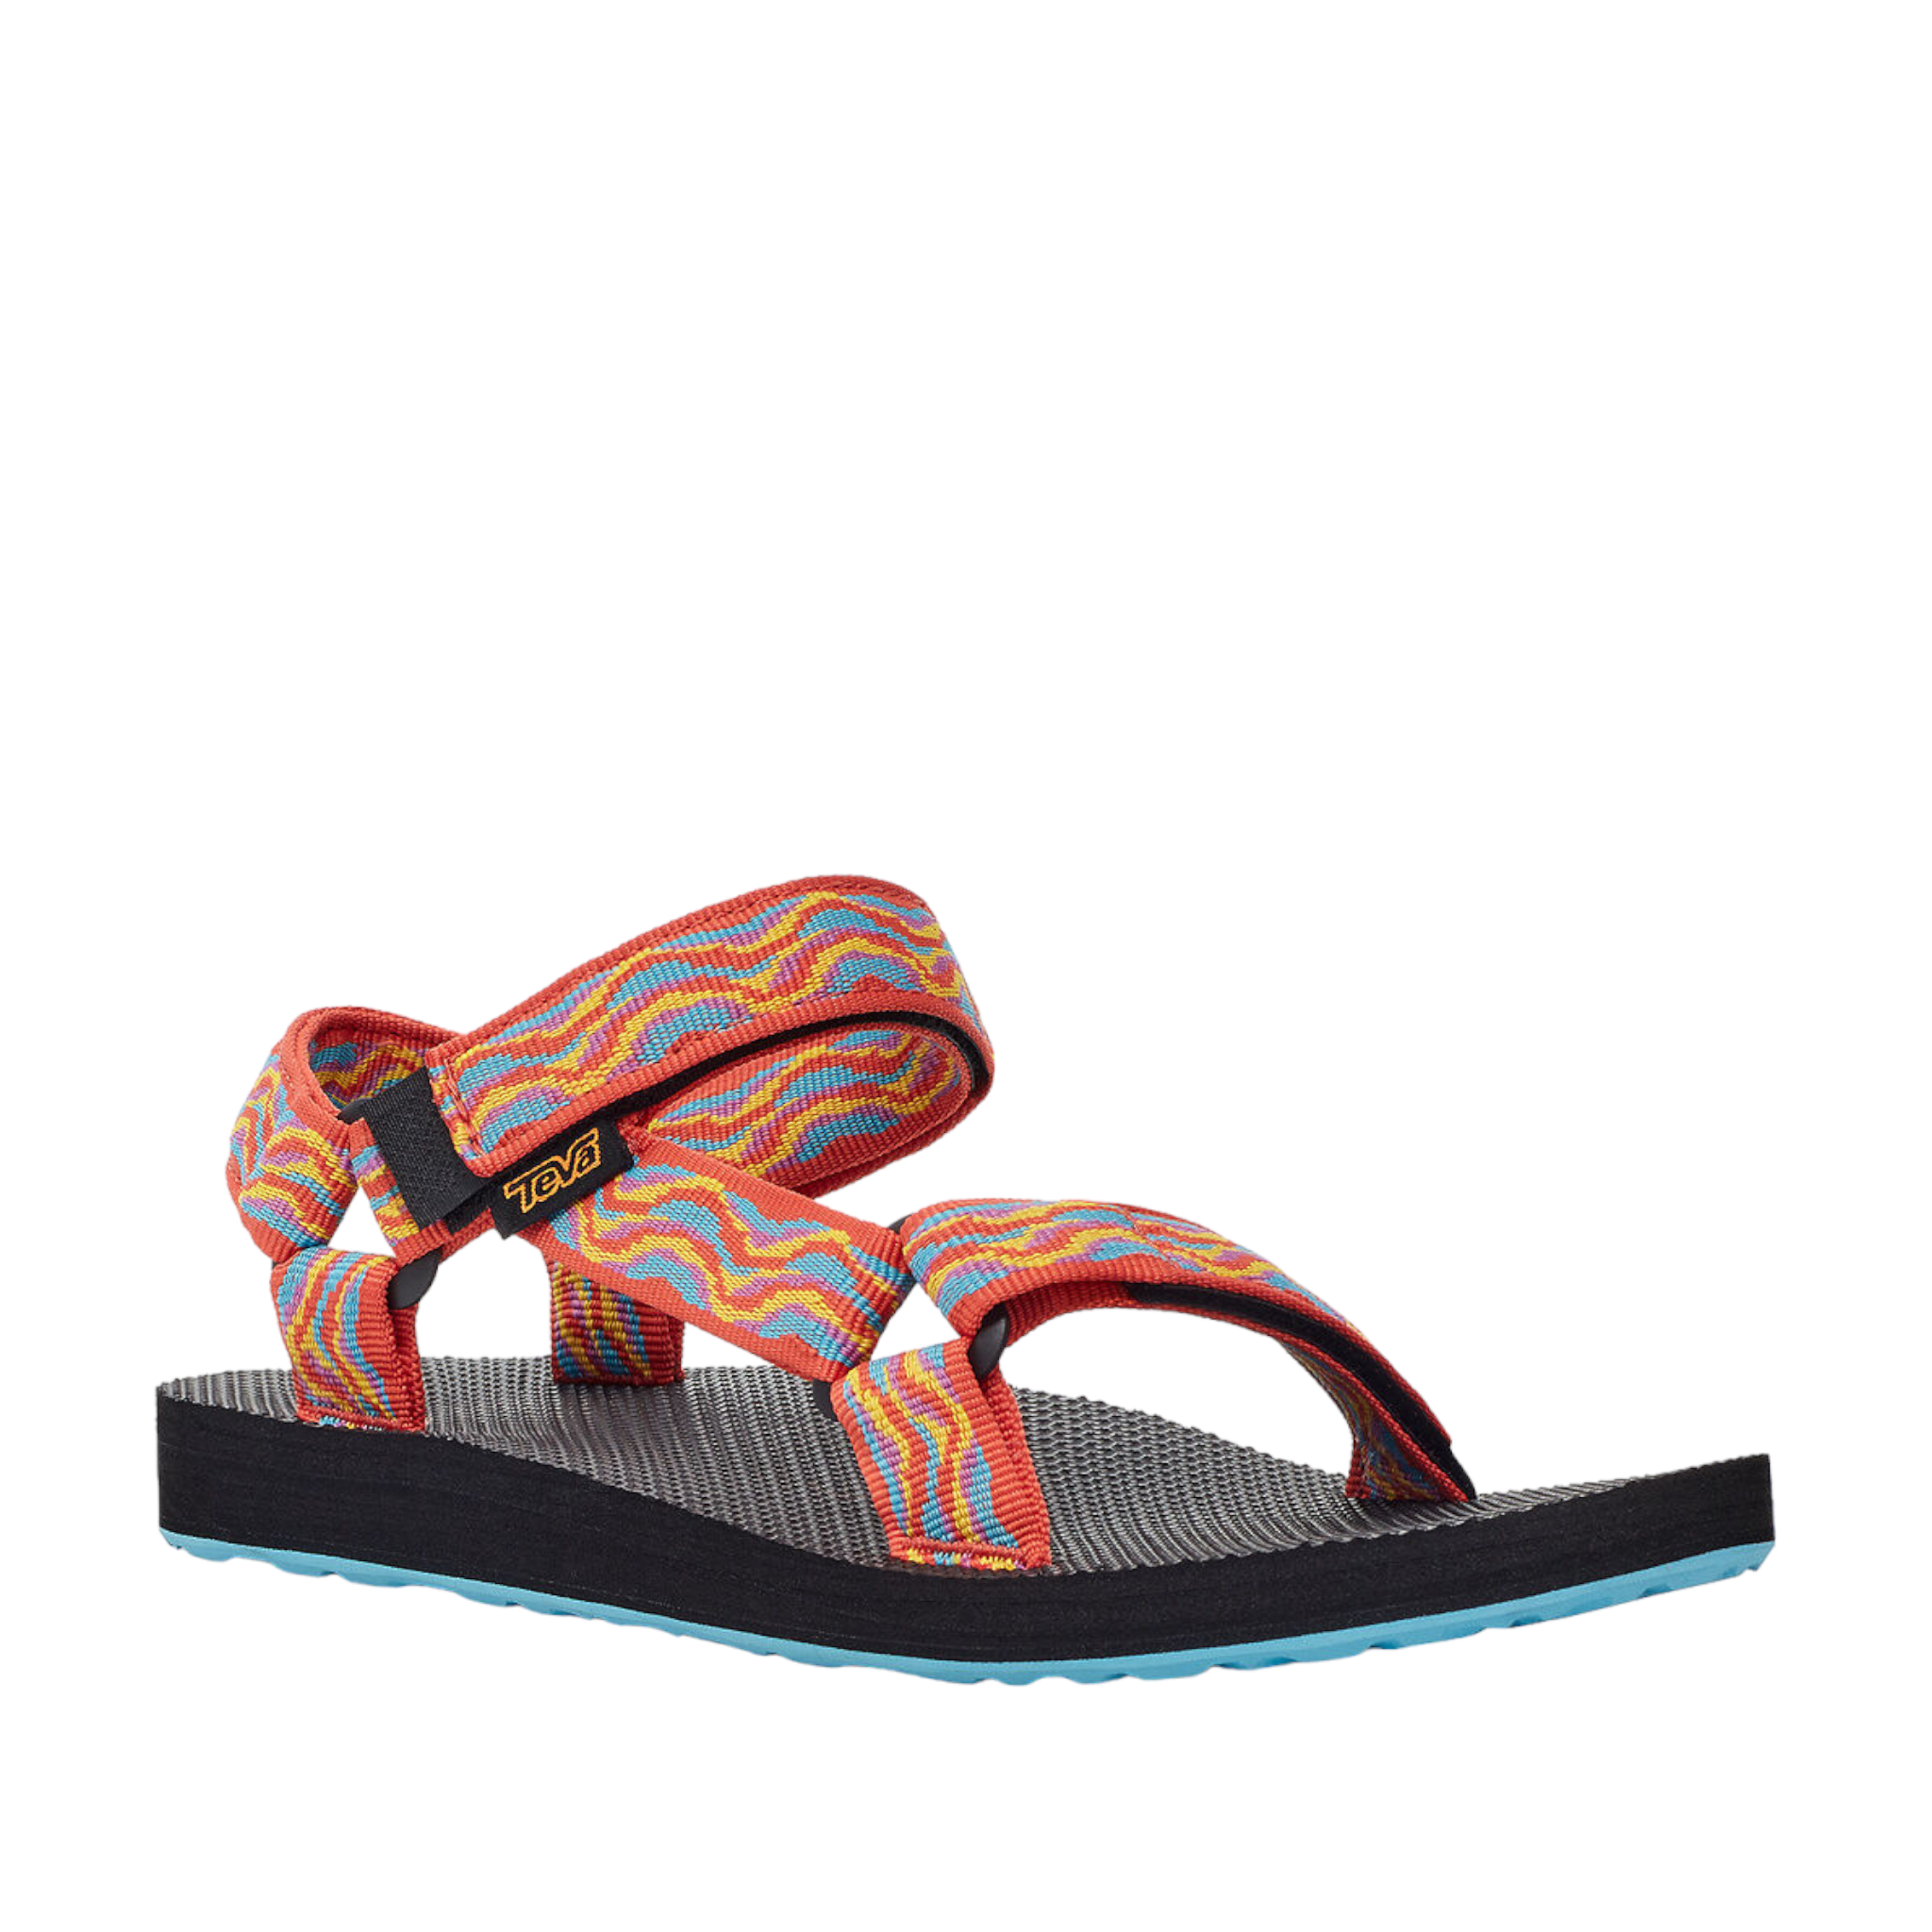 Shop W Original Universal Revive - with shoe&me - from Teva - Sandals - Sandals, Summer, Winter, Womens